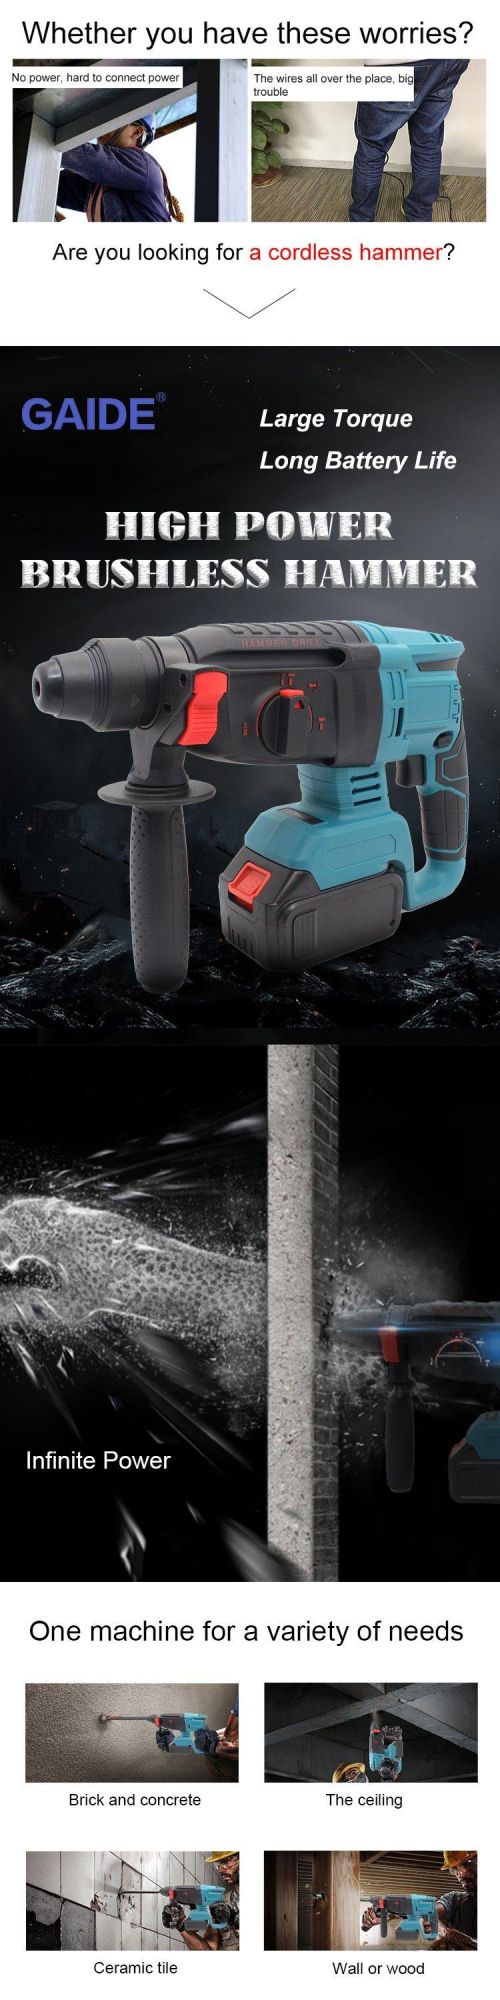 Gaide Power Hammer Customization Electric Cordless Rotary Hammer Experts